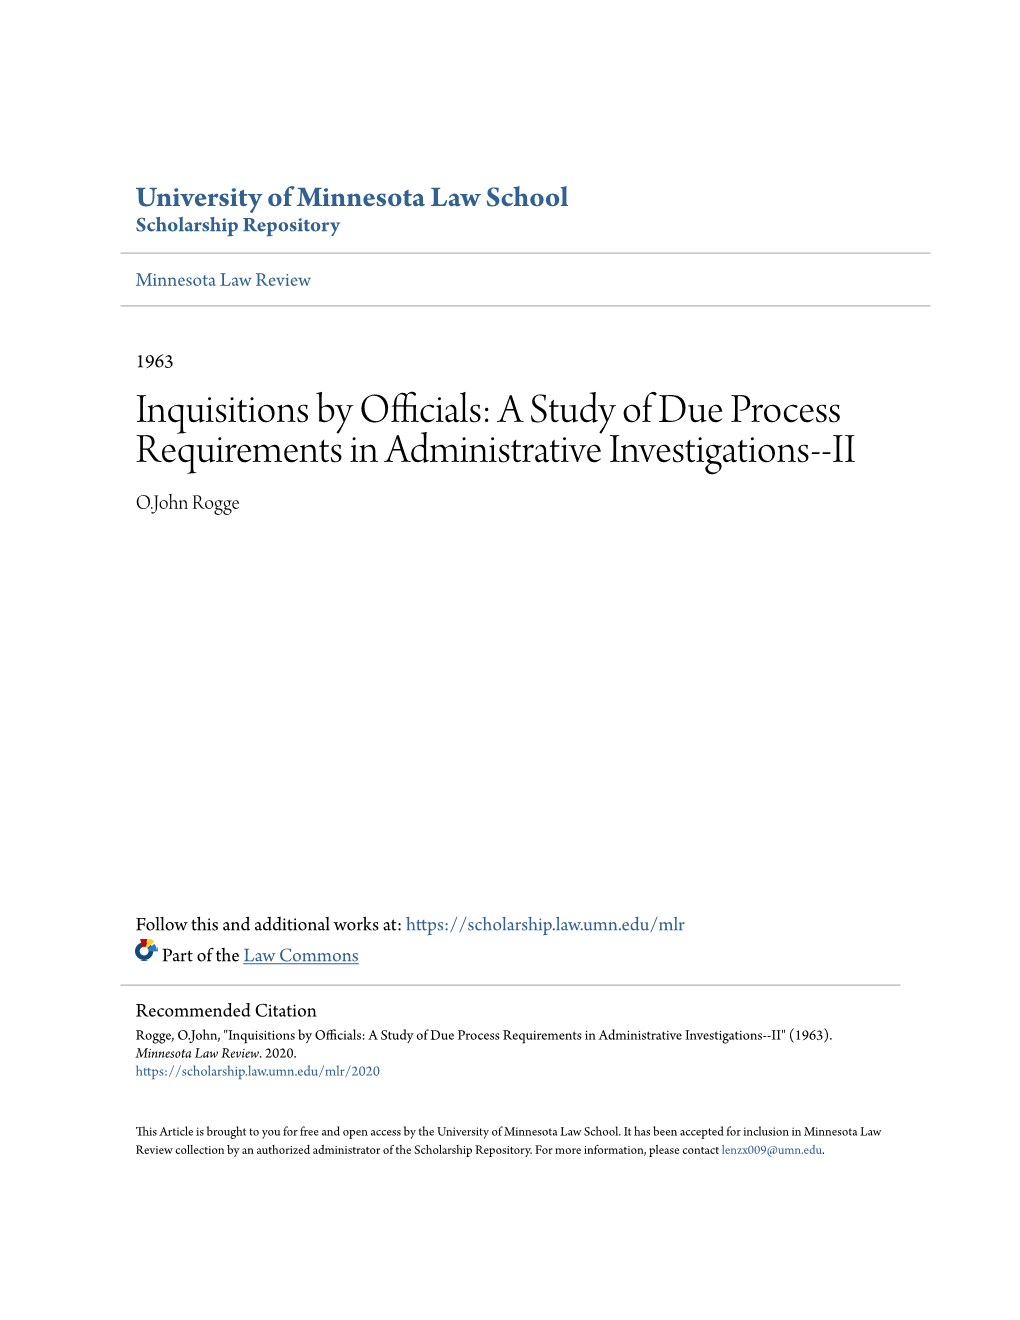 A Study of Due Process Requirements in Administrative Investigations--II O.John Rogge